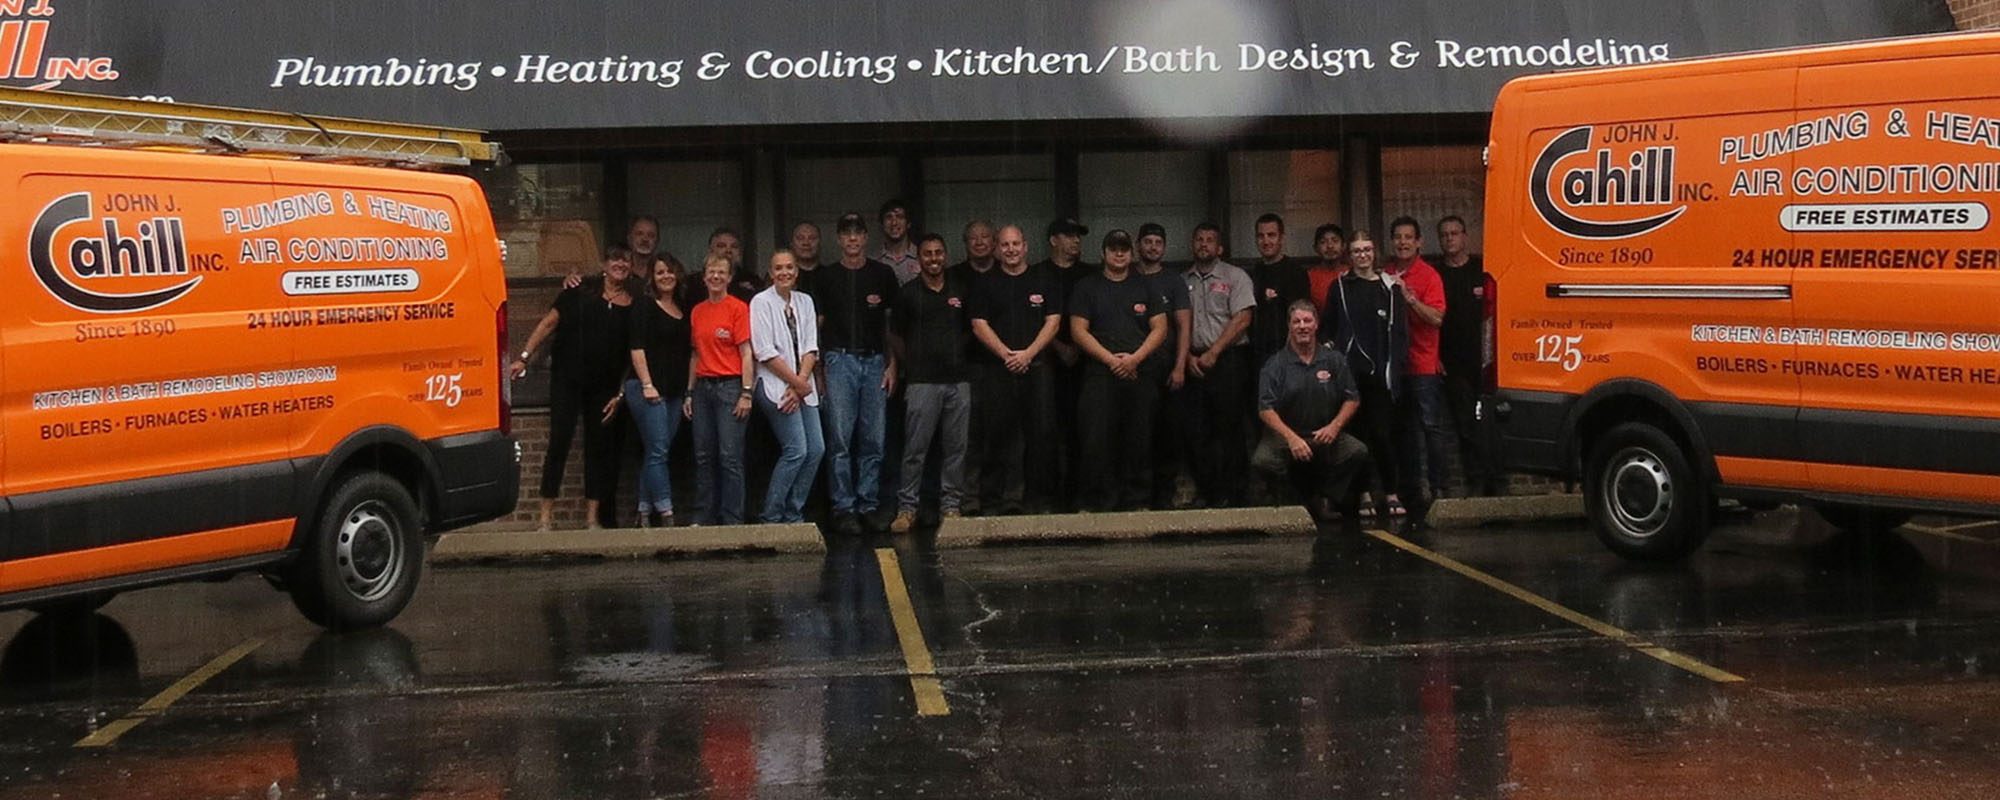 A group photo of the team at furnace repair company John J. Cahill Inc. servicing Chicago, IL